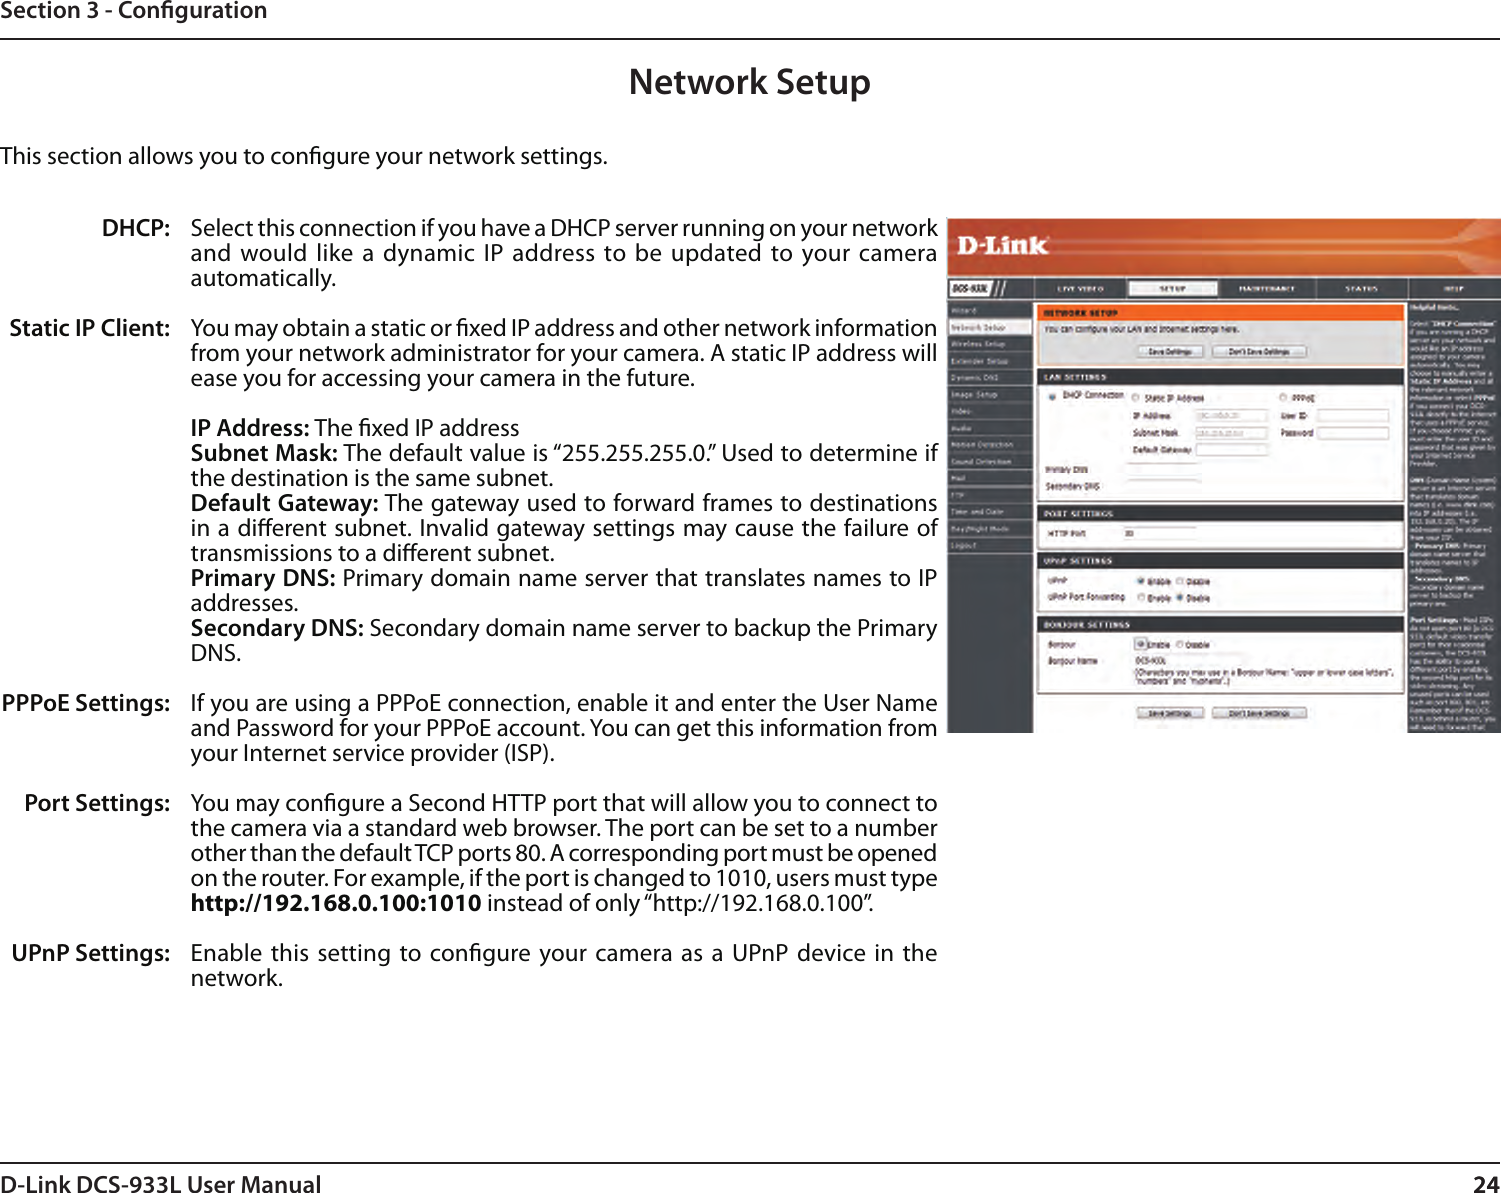 24D-Link DCS-933L User Manual 24Section 3 - CongurationNetwork SetupSelect this connection if you have a DHCP server running on your network and would like  a dynamic IP  address to be  updated to your camera automatically. You may obtain a static or xed IP address and other network information from your network administrator for your camera. A static IP address will ease you for accessing your camera in the future.IP Address: The xed IP addressSubnet Mask: The default value is “255.255.255.0.” Used to determine if the destination is the same subnet.Default Gateway: The gateway used to forward frames to destinations in a dierent subnet. Invalid gateway settings may cause the failure of transmissions to a dierent subnet.Primary DNS: Primary domain name server that translates names to IP addresses.Secondary DNS: Secondary domain name server to backup the Primary DNS.If you are using a PPPoE connection, enable it and enter the User Name and Password for your PPPoE account. You can get this information from your Internet service provider (ISP).You may congure a Second HTTP port that will allow you to connect to the camera via a standard web browser. The port can be set to a number other than the default TCP ports 80. A corresponding port must be opened on the router. For example, if the port is changed to 1010, users must type http://192.168.0.100:1010 instead of only “http://192.168.0.100”. Enable this  setting to  congure your camera as  a UPnP device in the network.DHCP:Static IP Client:PPPoE Settings:Port Settings:UPnP Settings:This section allows you to congure your network settings.